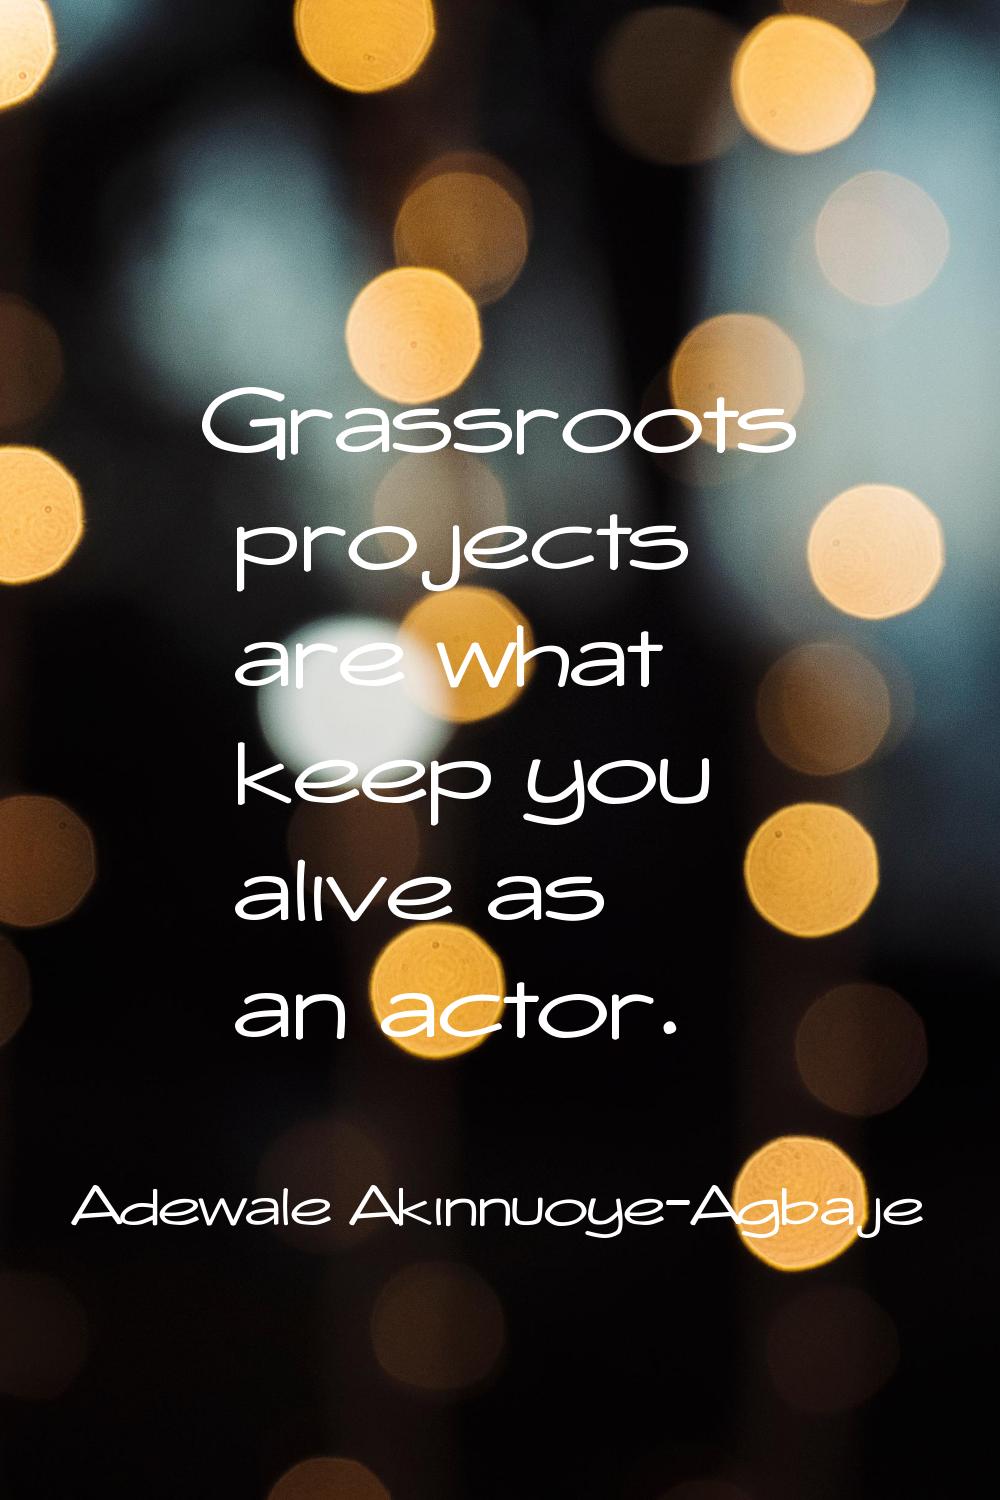 Grassroots projects are what keep you alive as an actor.